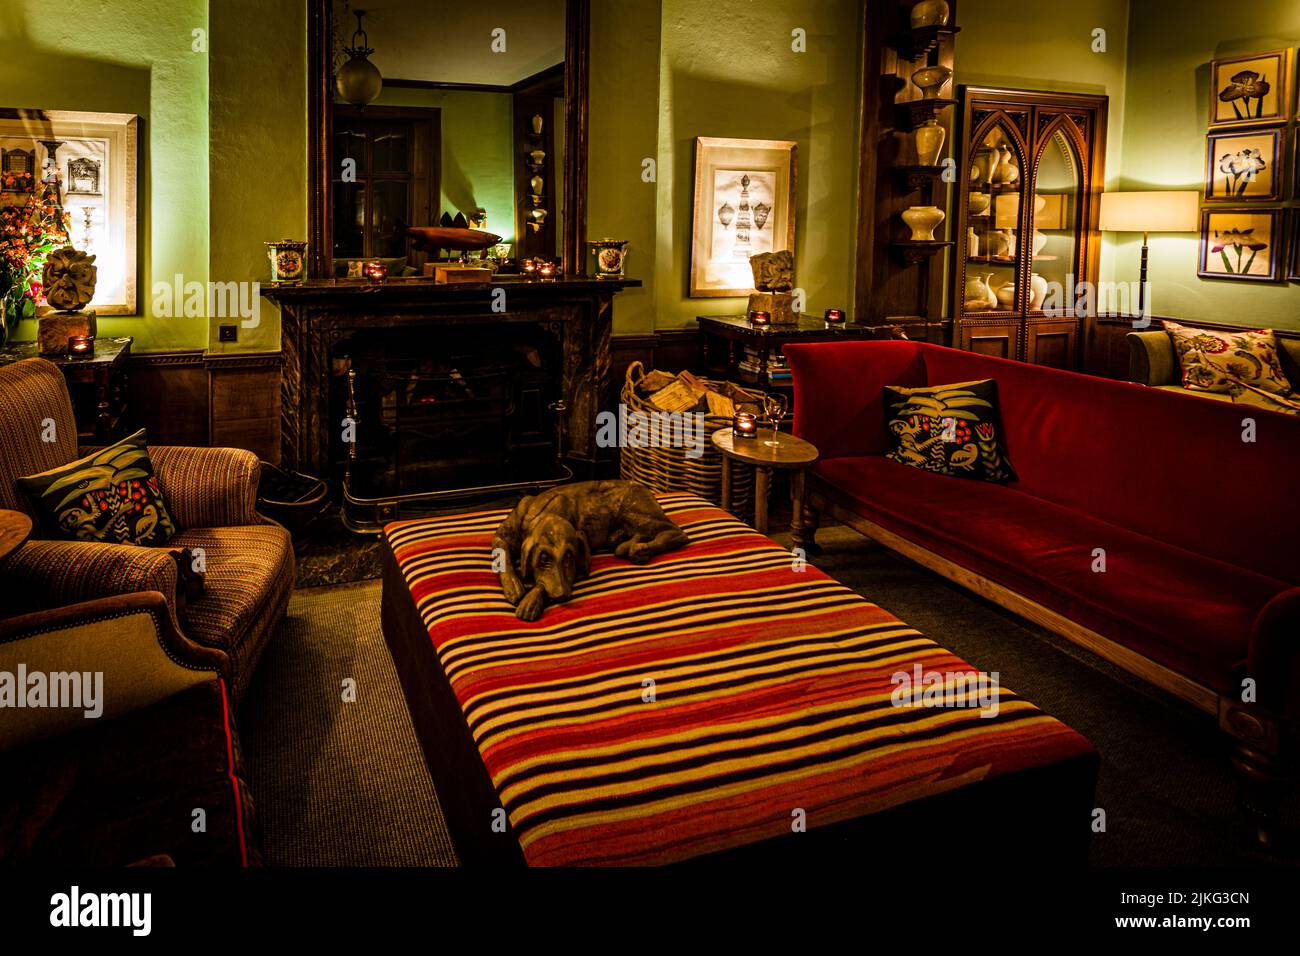 The salon at the Endleigh Hotel with wonderful seating as well as a fireplace and decorative wooden dog Stock Photo